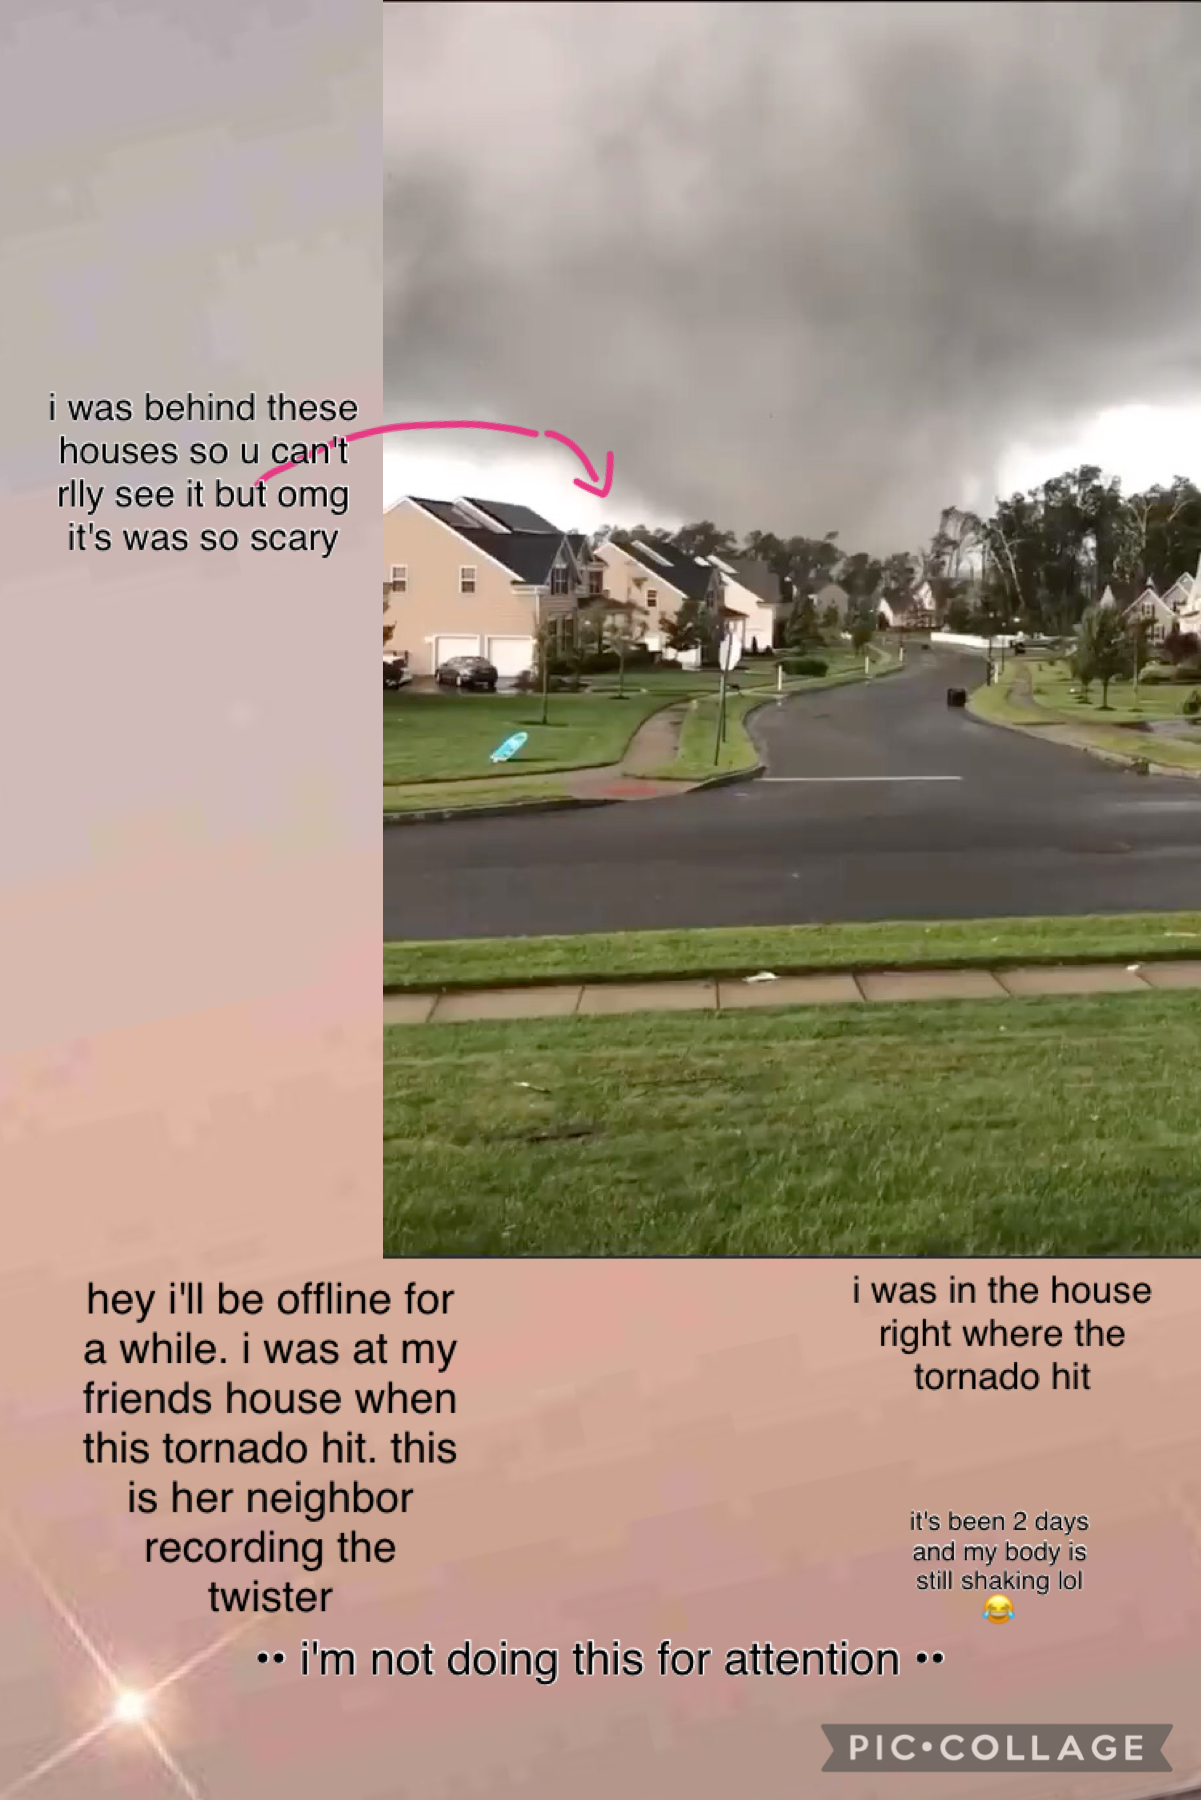 u can't see the video ig but yeah
• it was so scary, over 1 thousand houses were destroyed and there are a bunch of ppl living in our churches and schools 